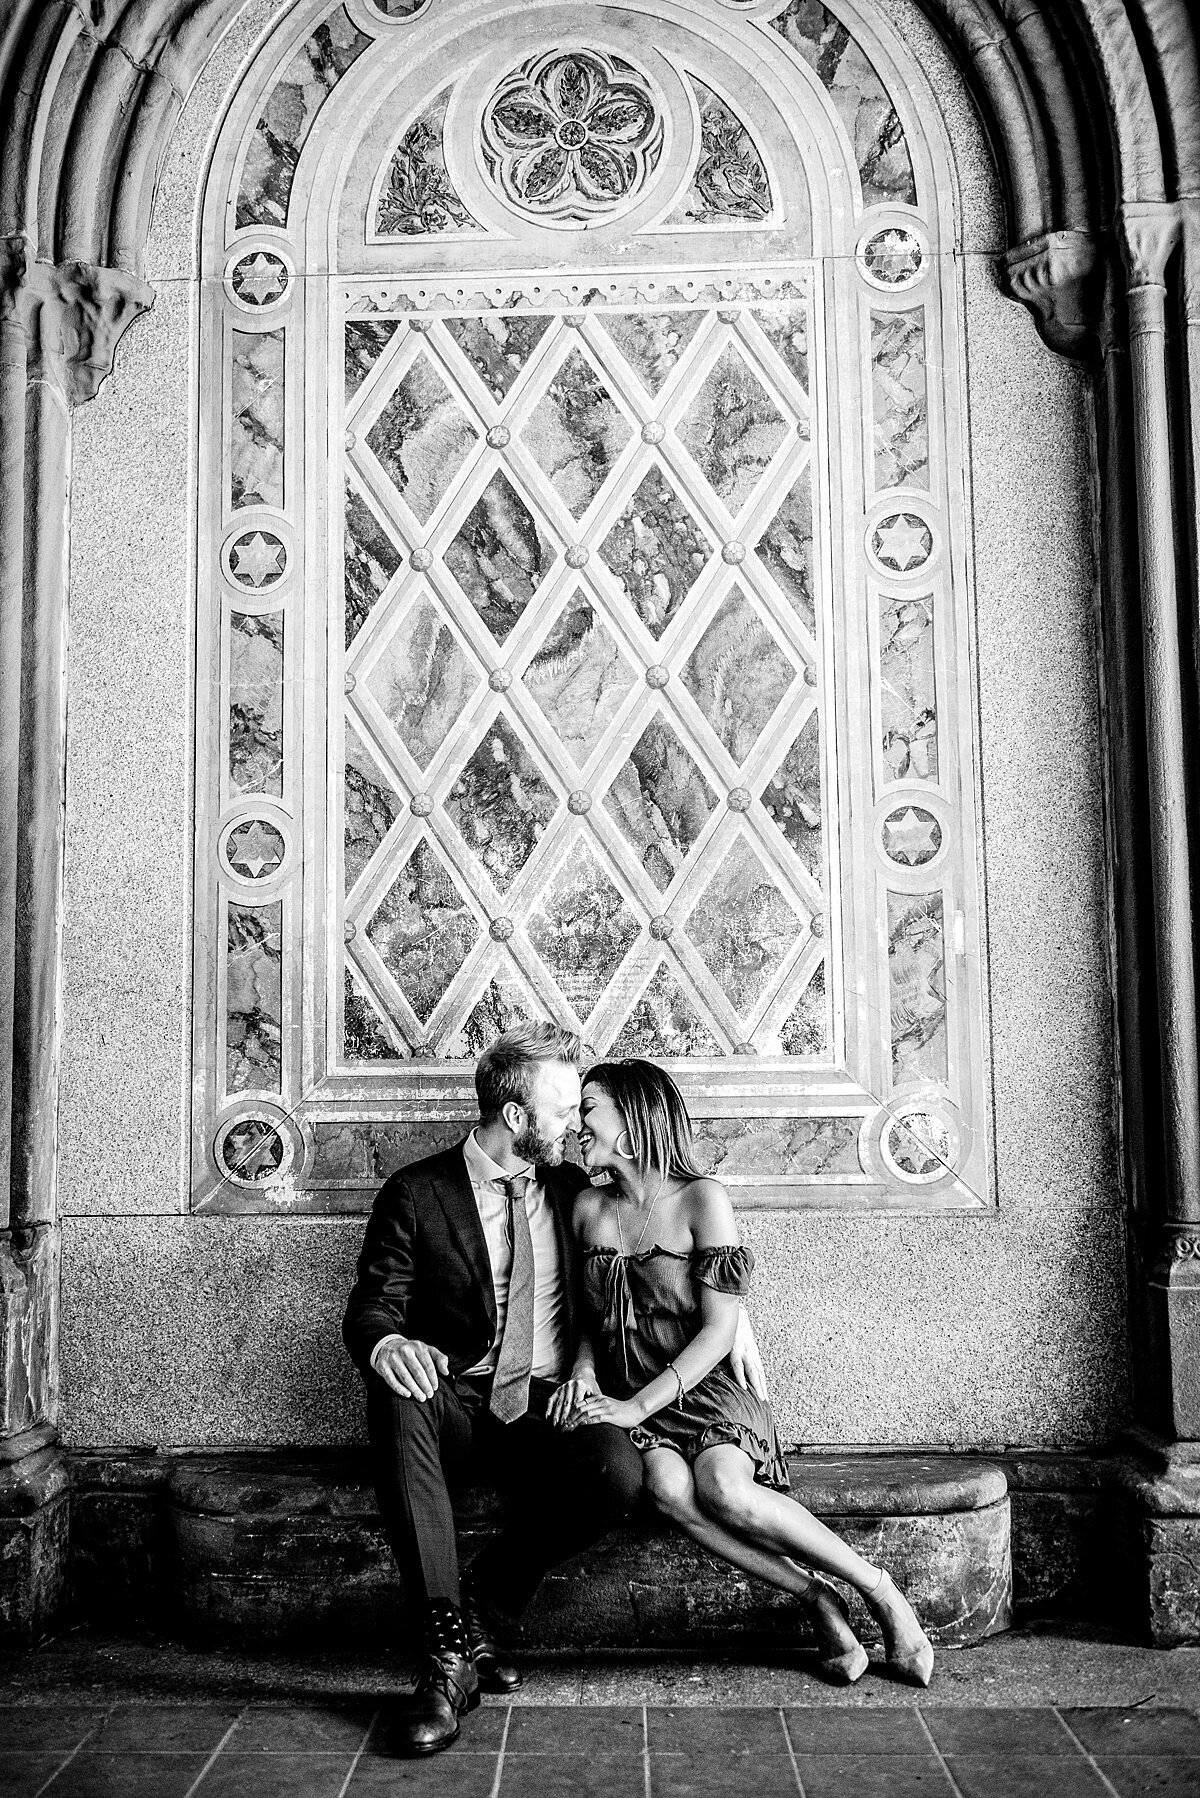 Black and White photo of couple sitting in iconic New York archway in Central Park